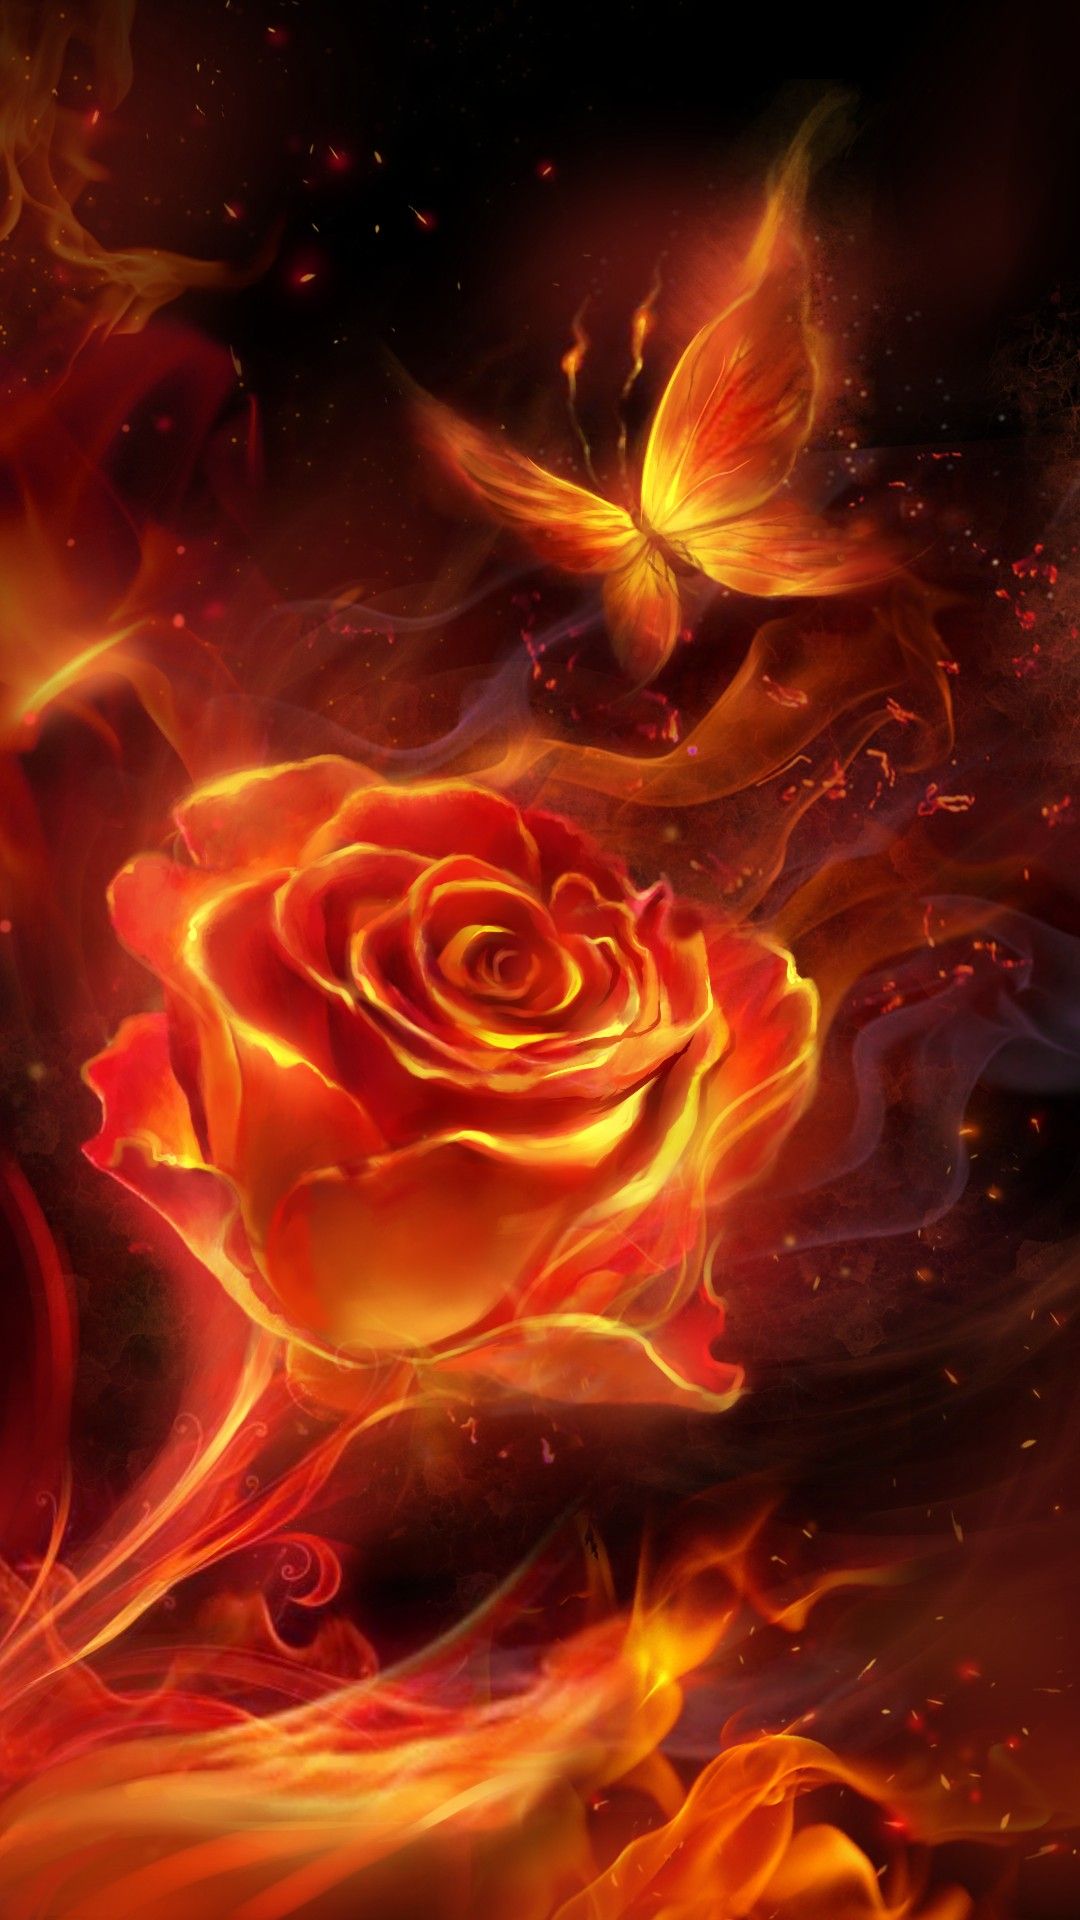 Roses and butterflies of fire